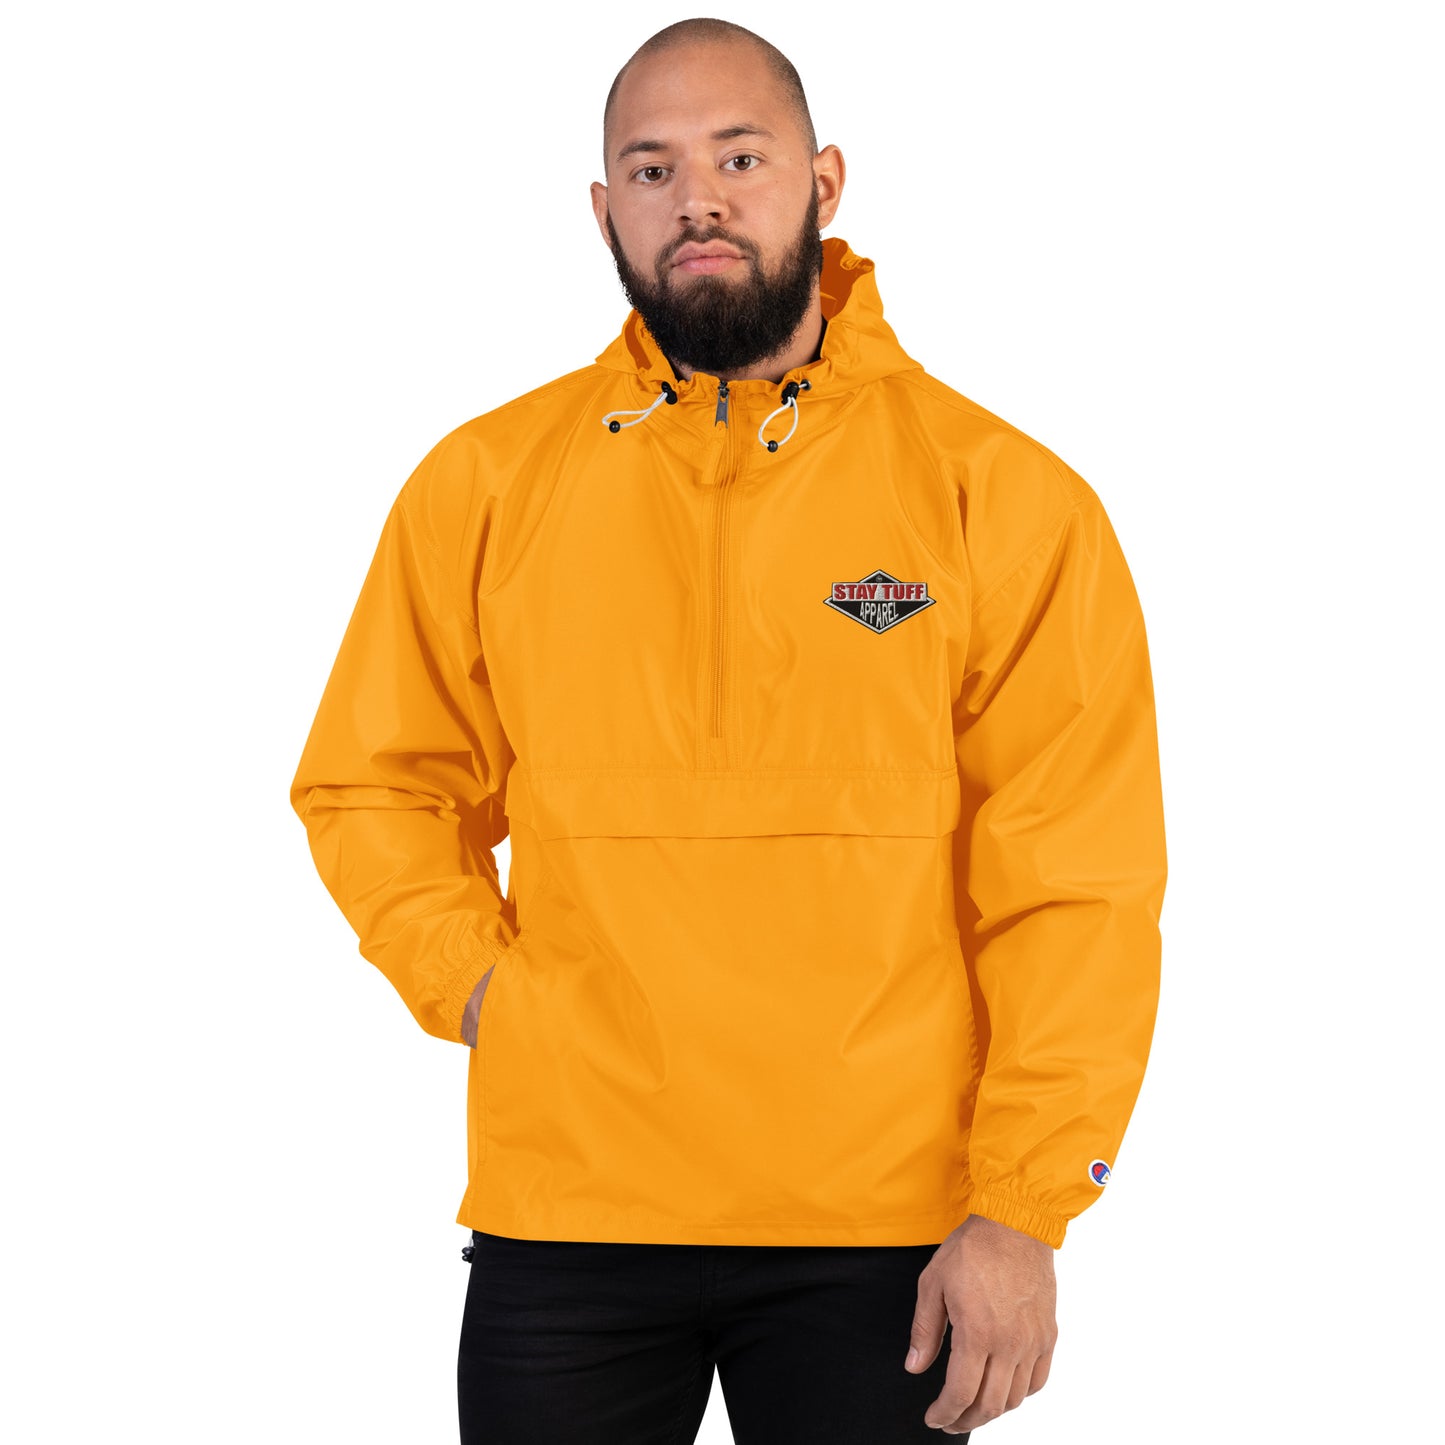 THE NEW STYLE (Embroidered Champion Packable Jacket)